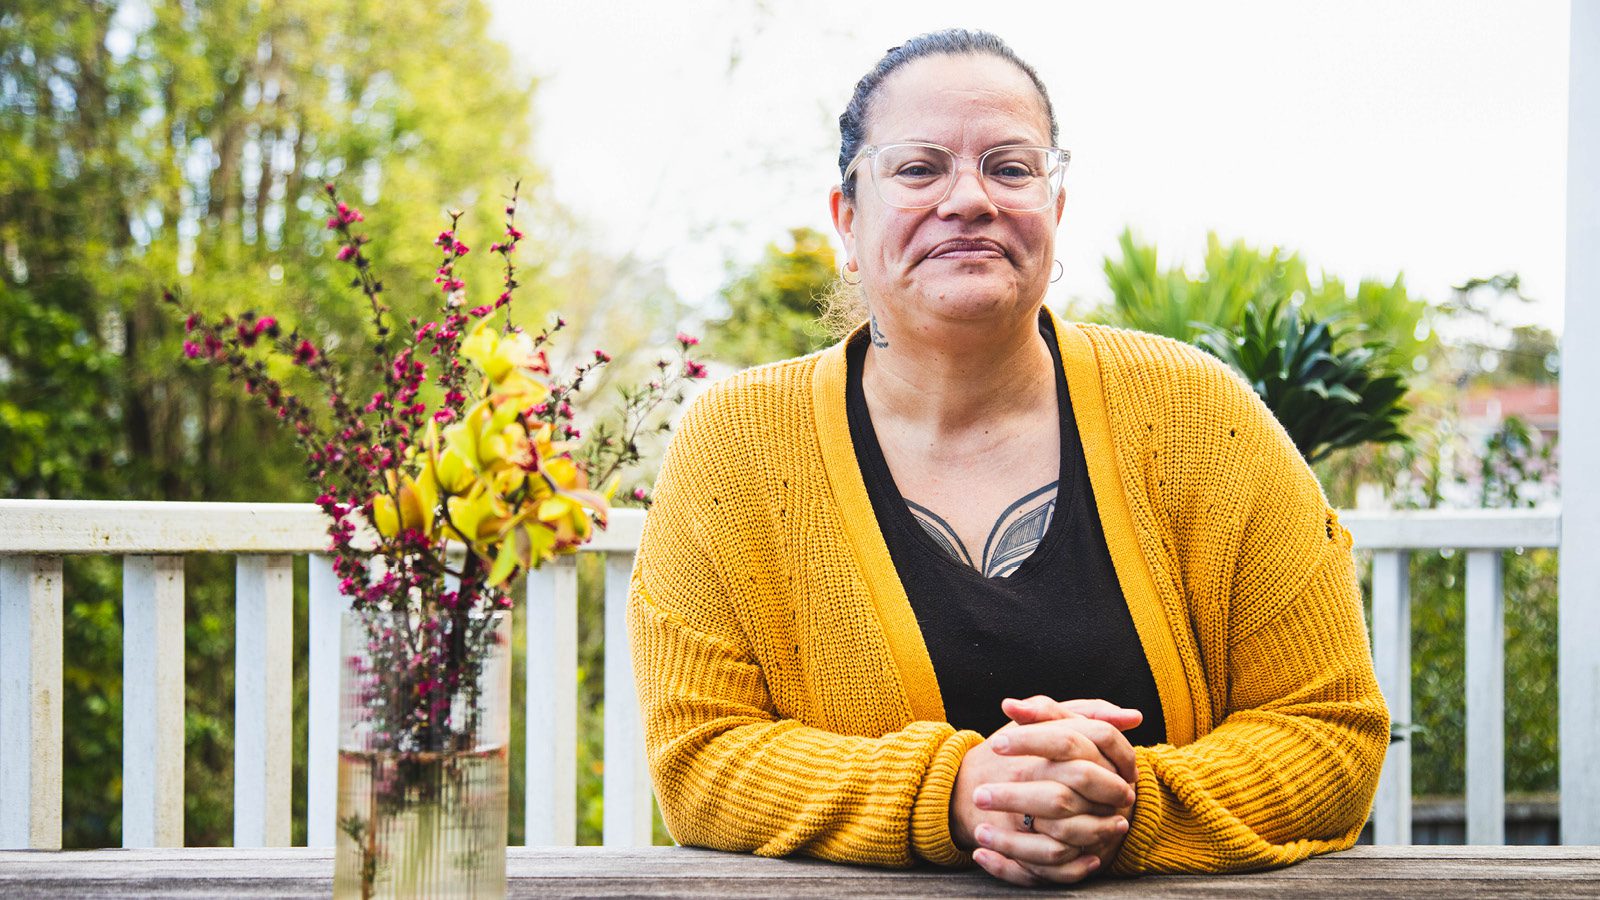 Tereanna's family were severely affected by Auckland's 2023 Anniversary weekend floods - Visionwest helped them out.